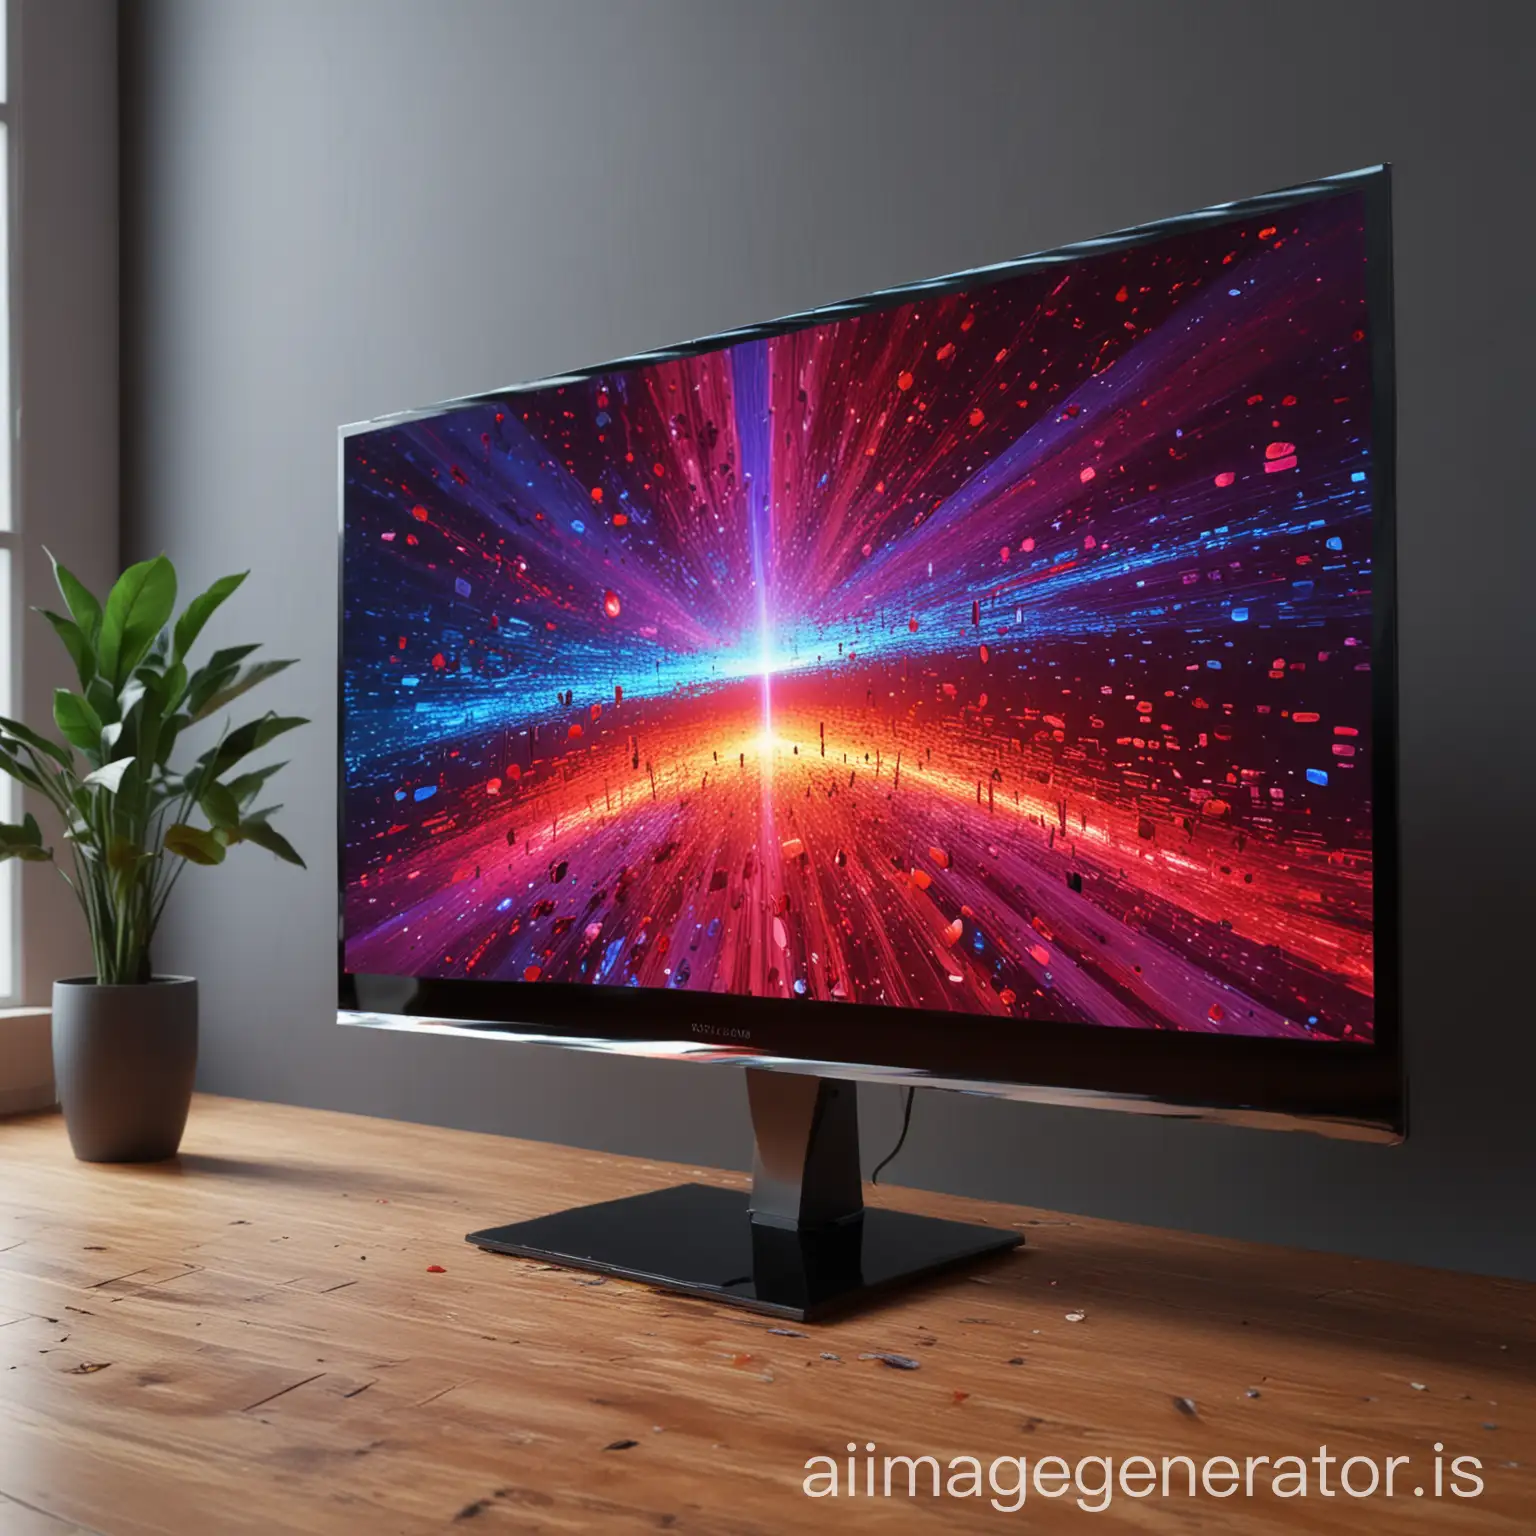 Futuristic-Holographic-Television-Display-in-Colorful-Setting